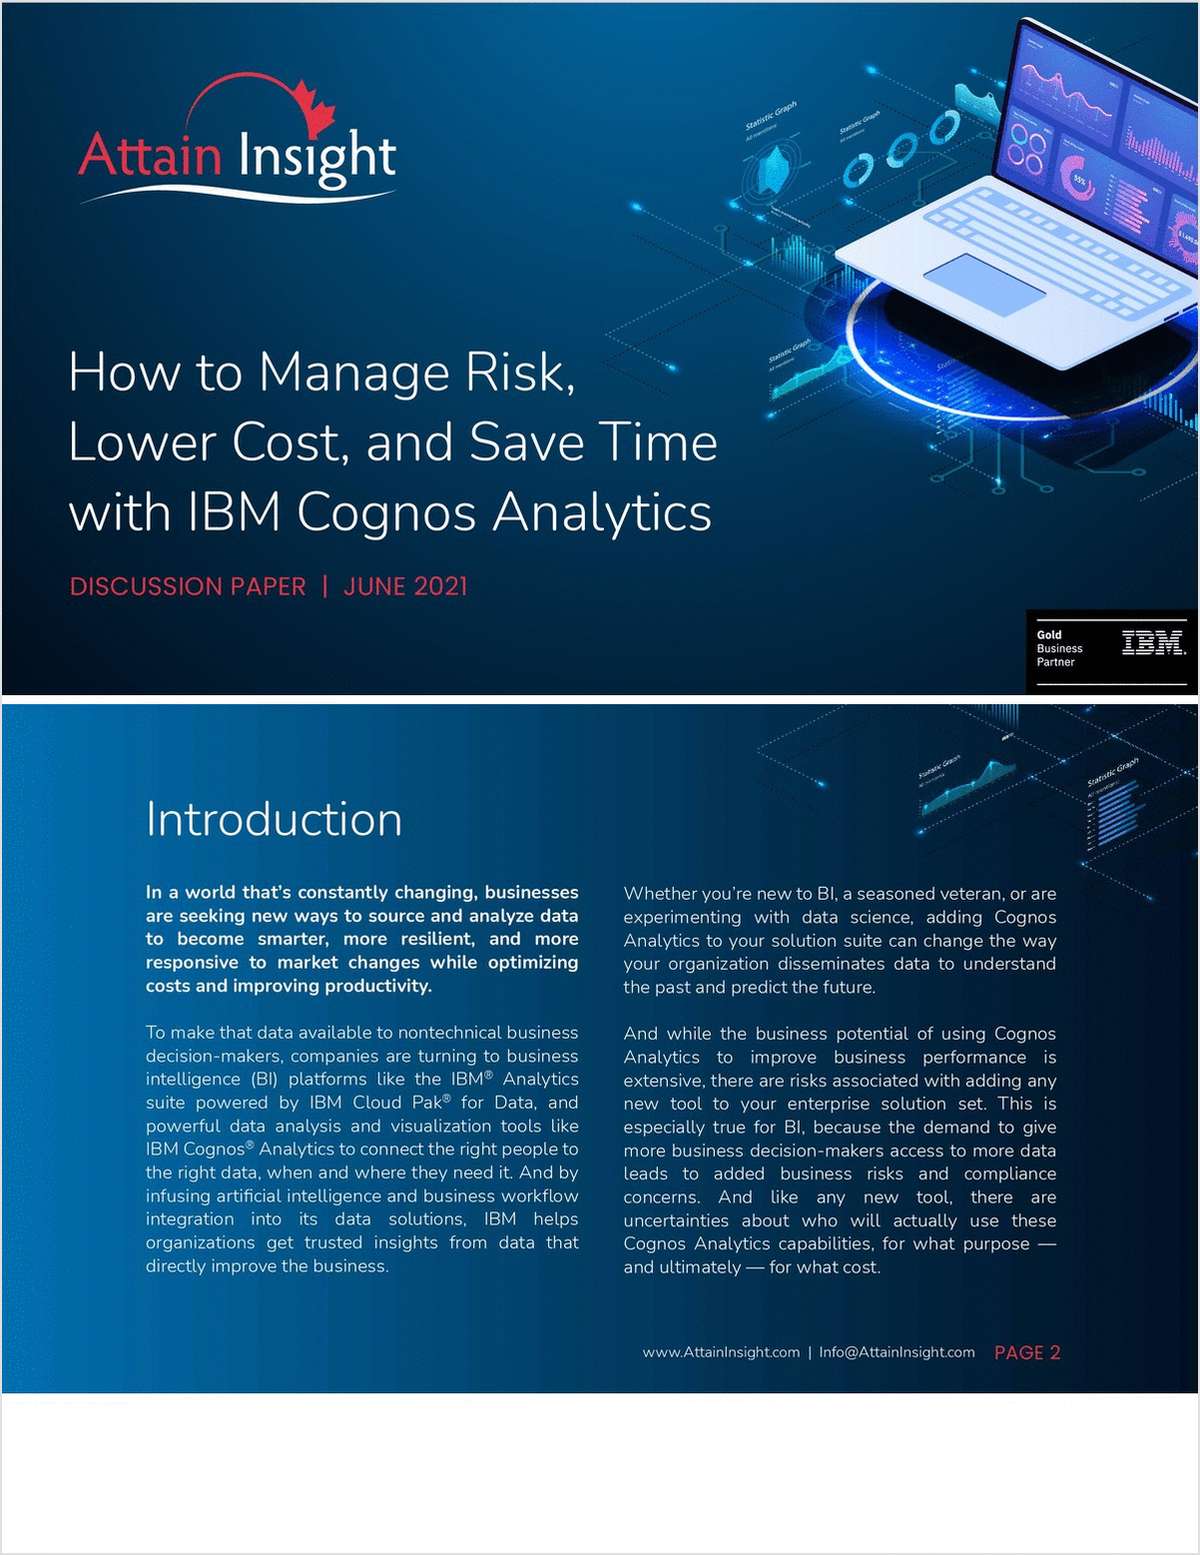 How to Manage Risk, Lower Cost, and Save Time with IBM Cognos Analytics